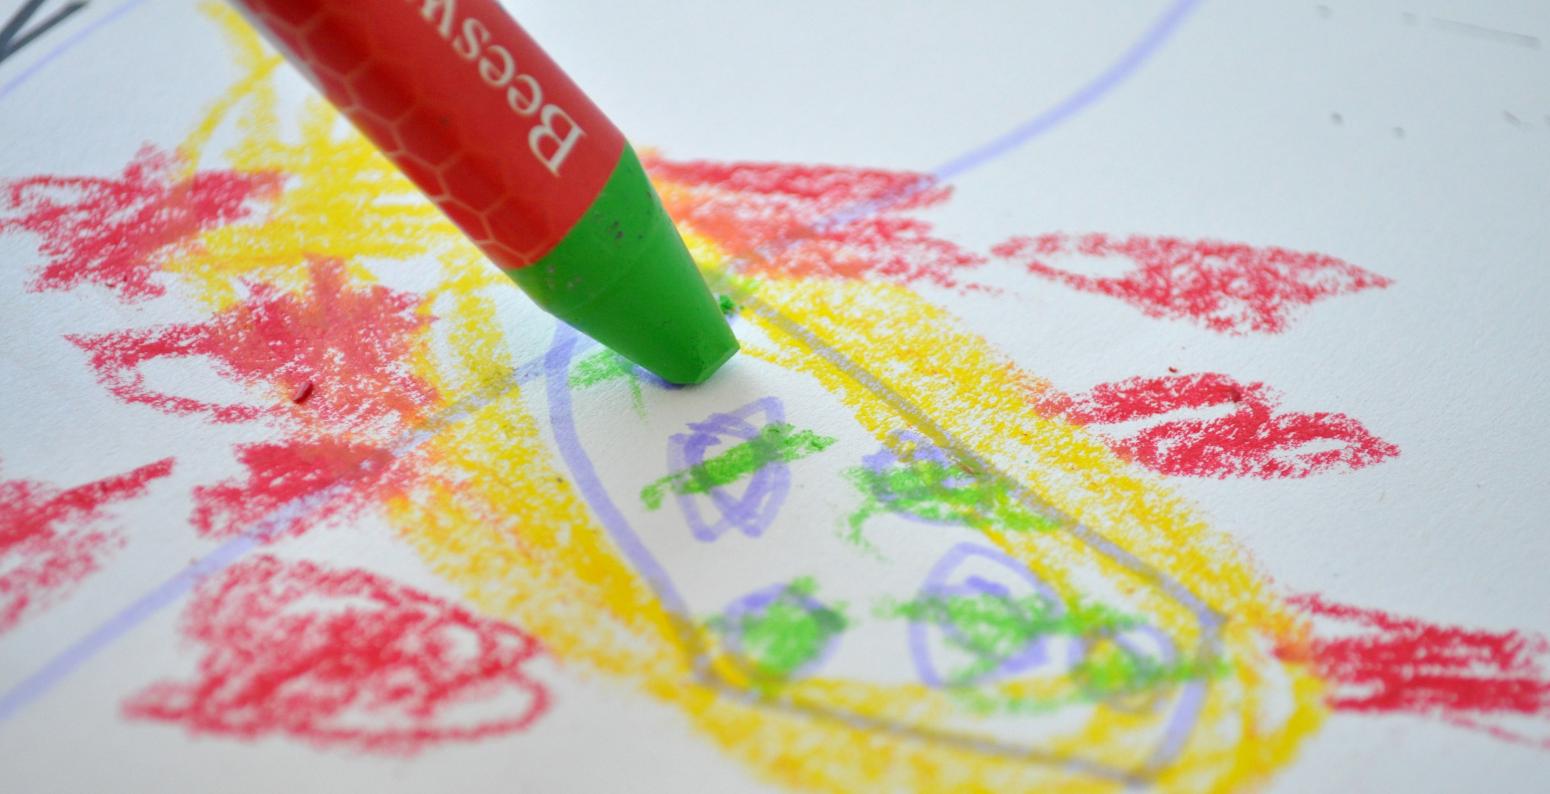 Green pastel crayon making marks on colorful piece of paper